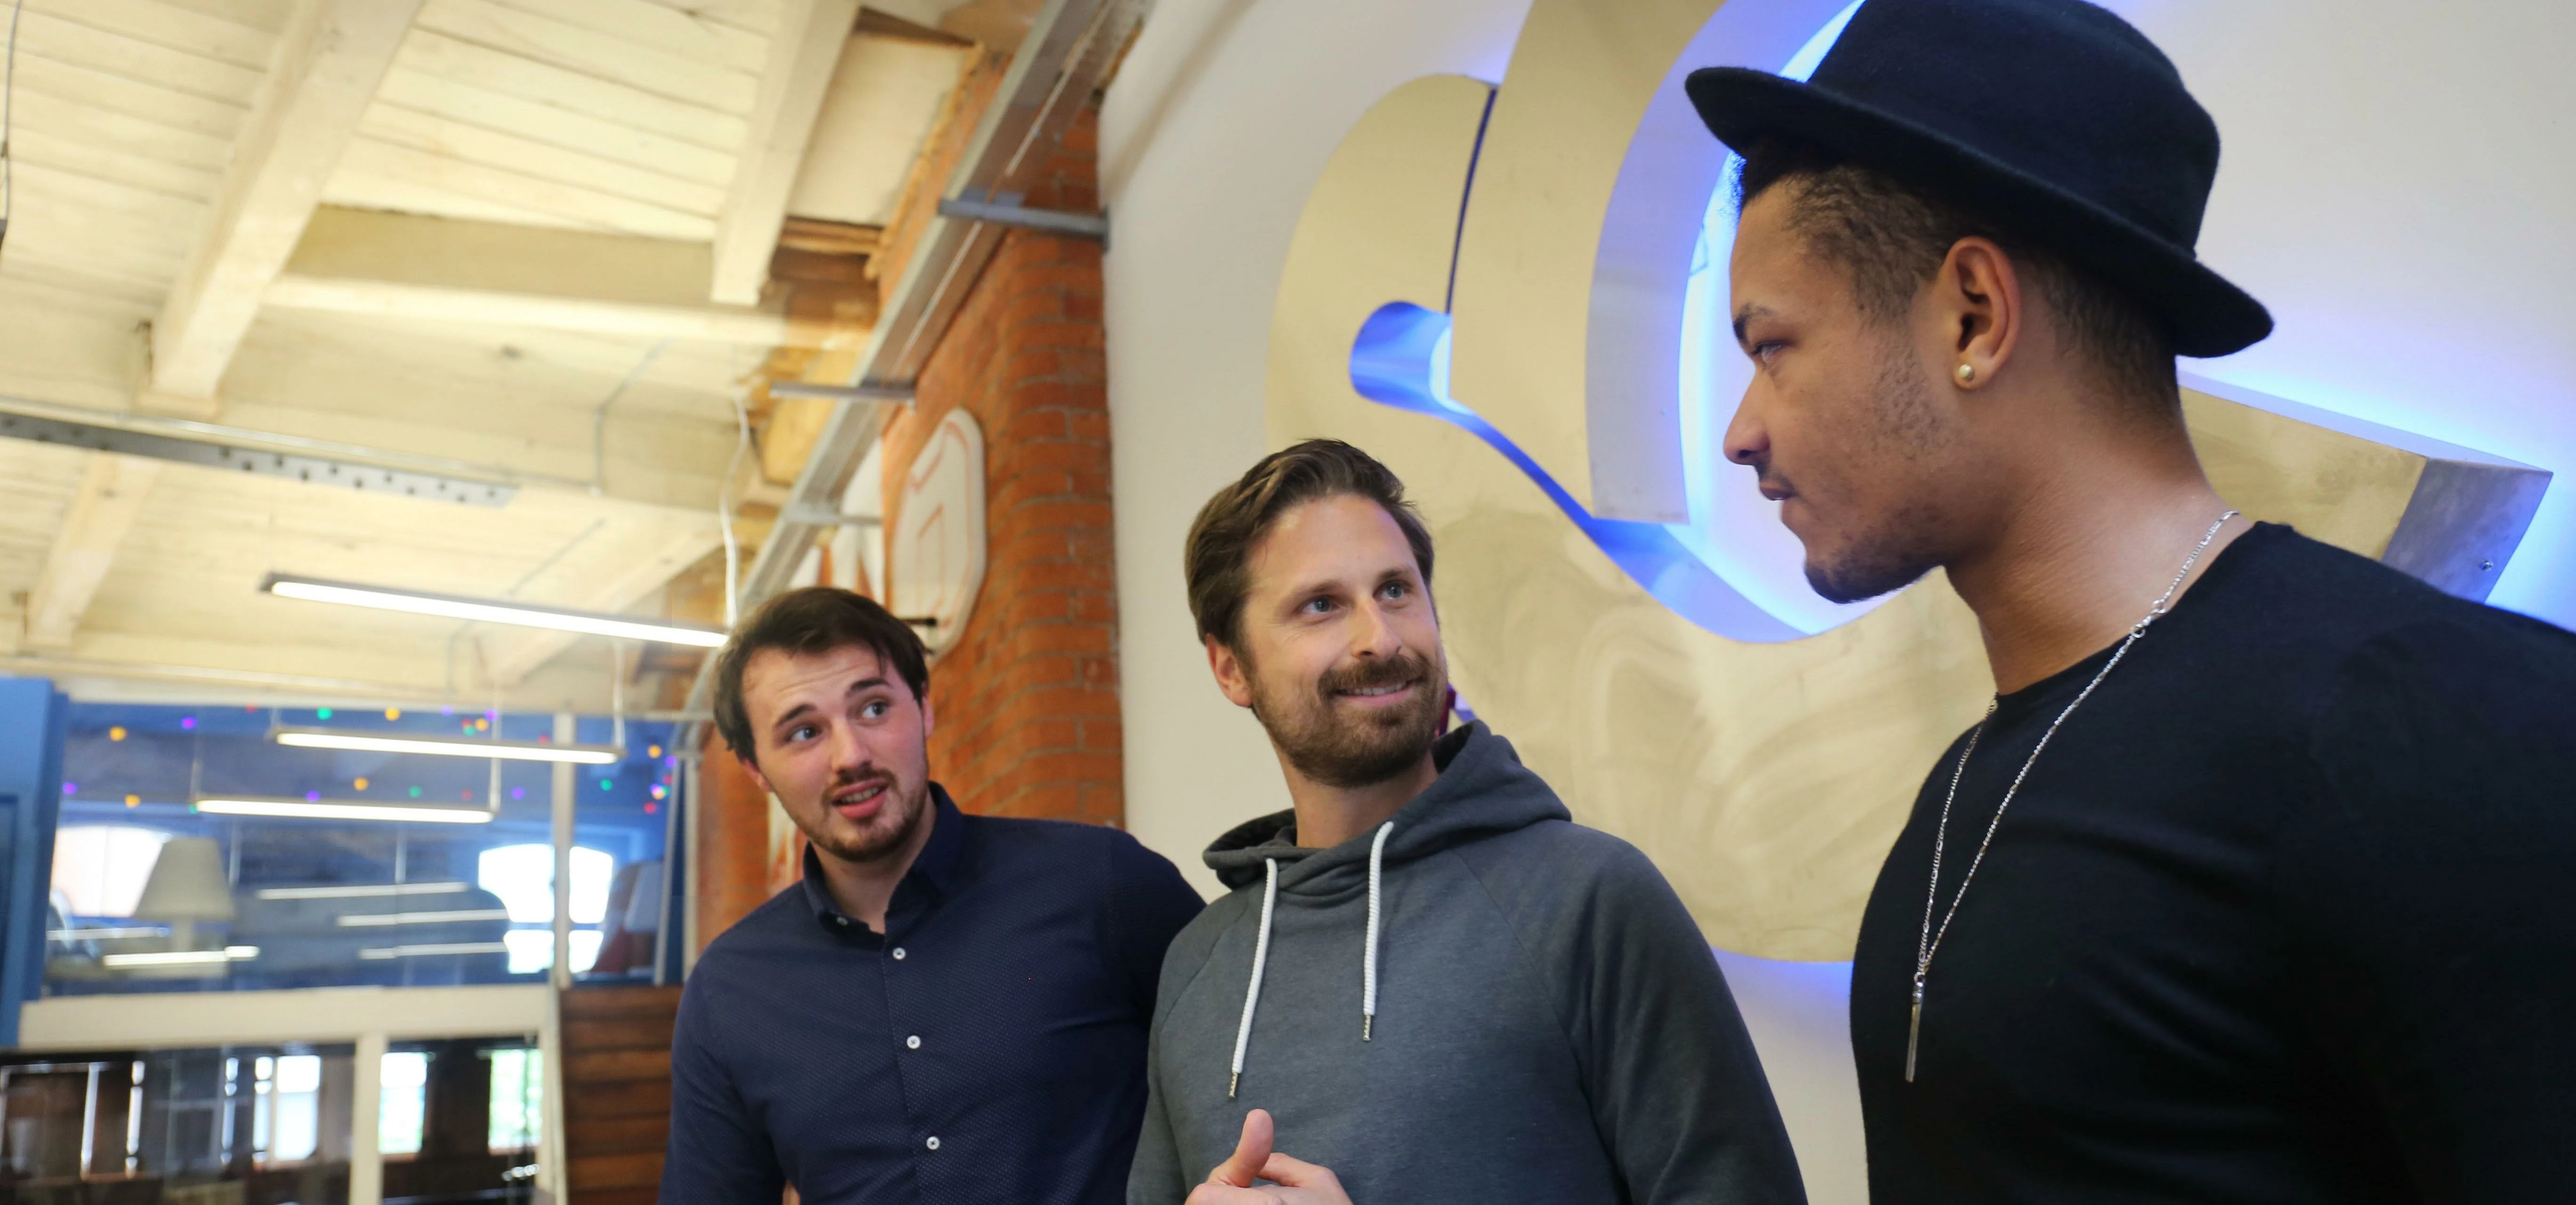 Co-founders Dominic and Steven with new hire Matthias Schmid, Social Chain HQ